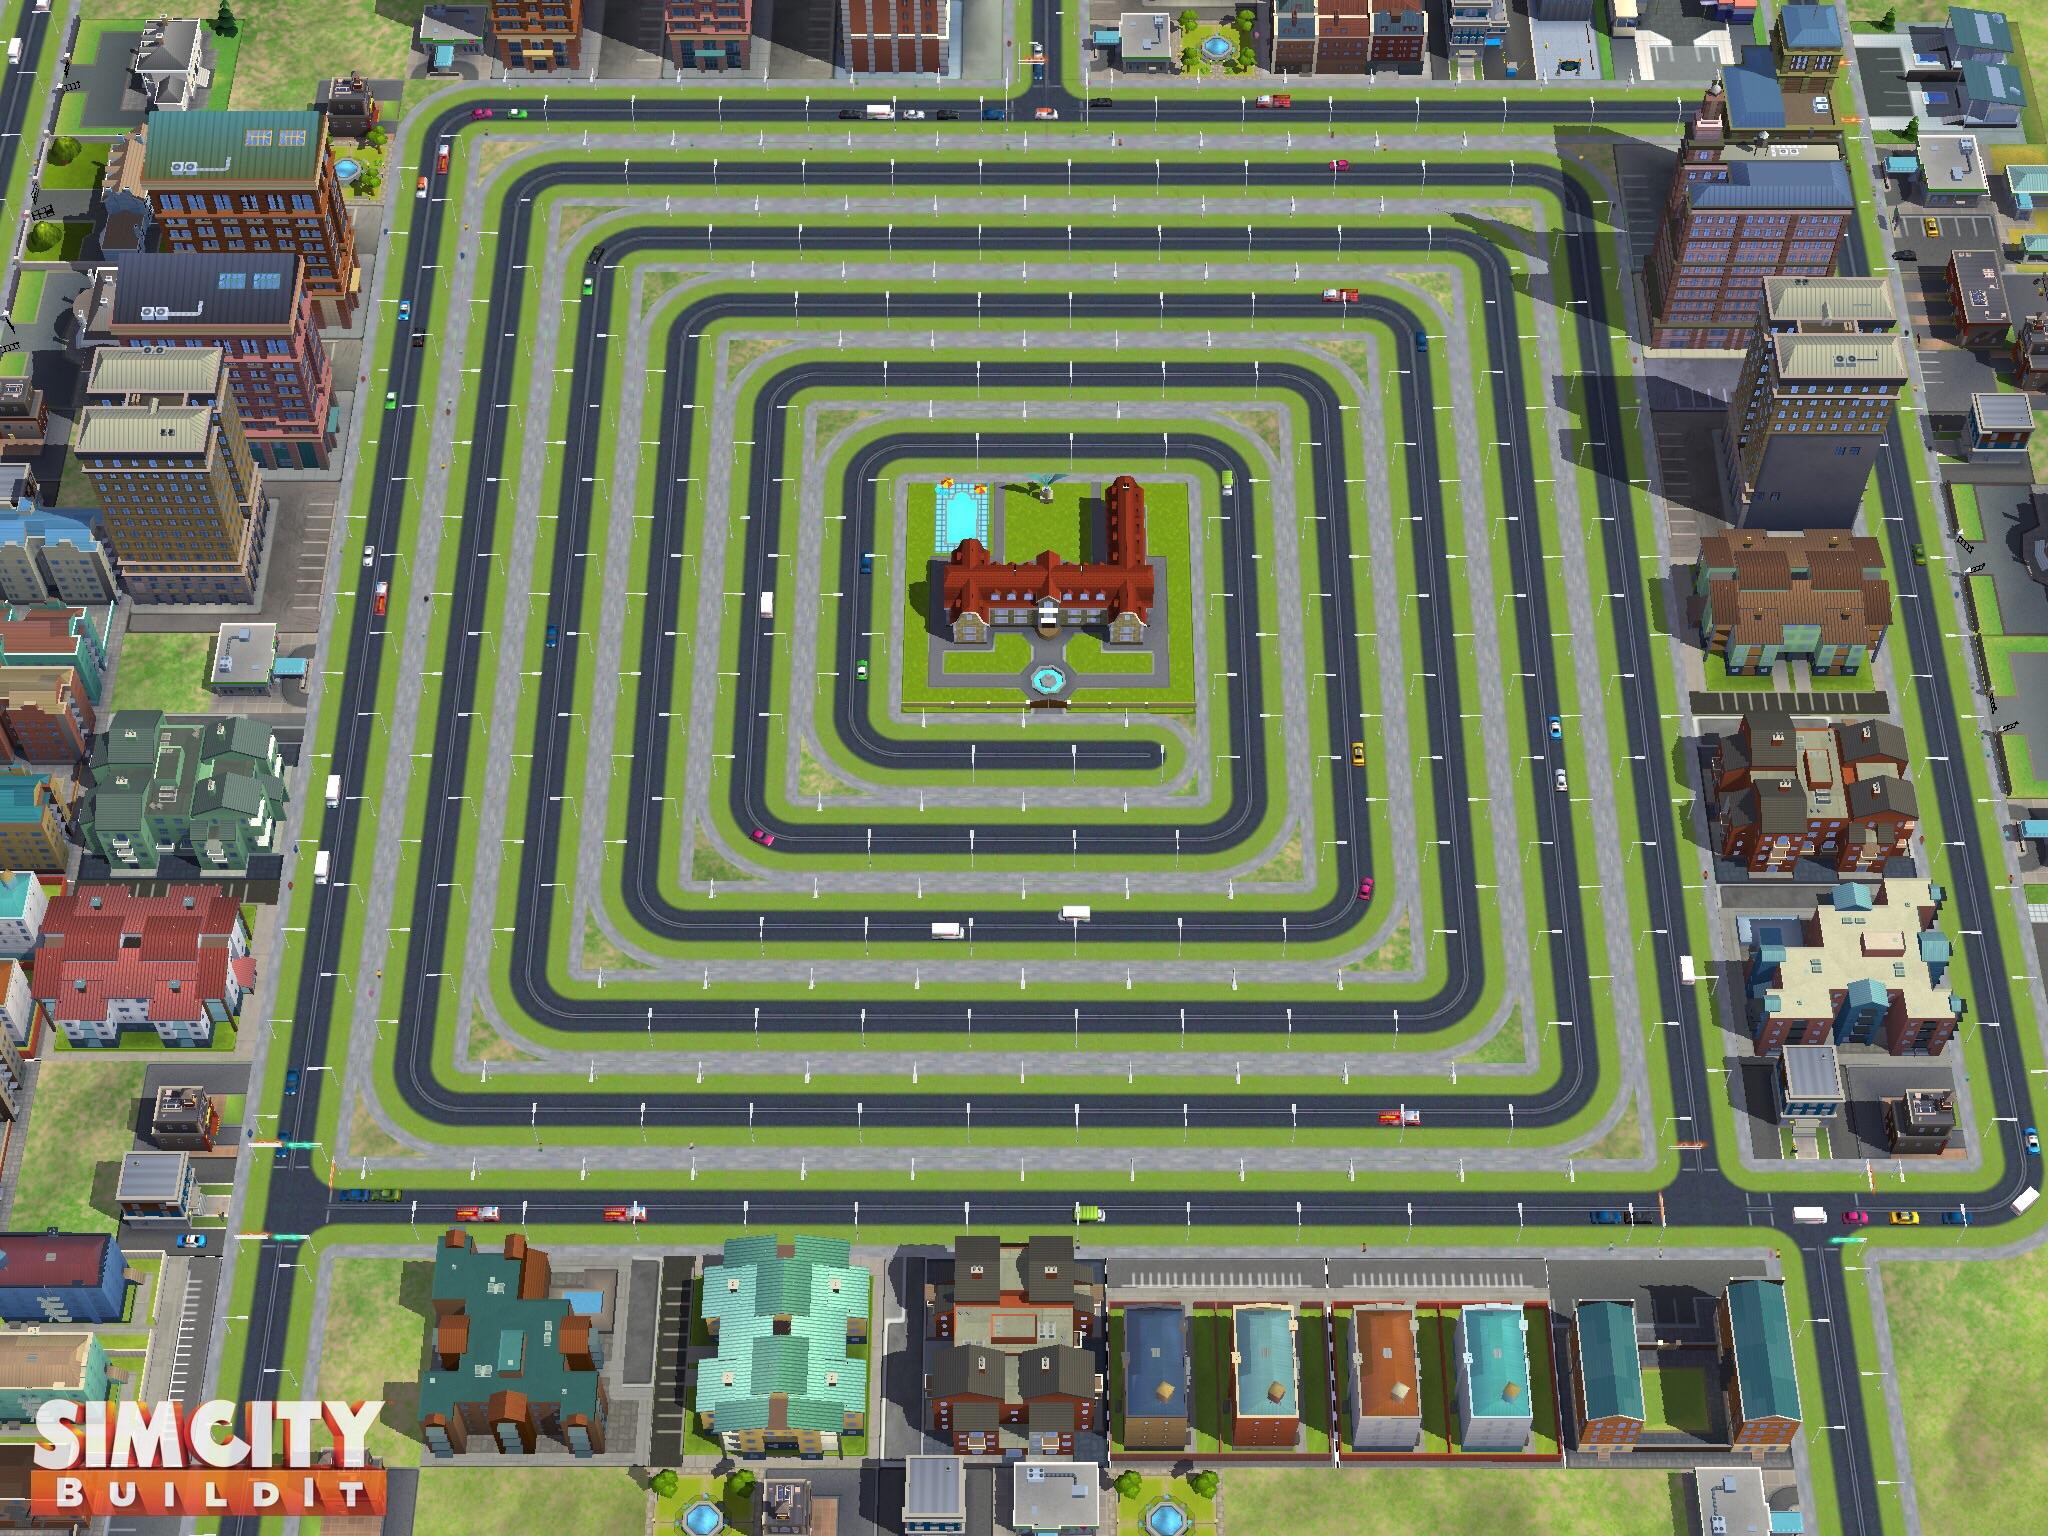 Simcity Buildit When You Want To Give Your Road Layout A Unique Flair Simcitybuildit